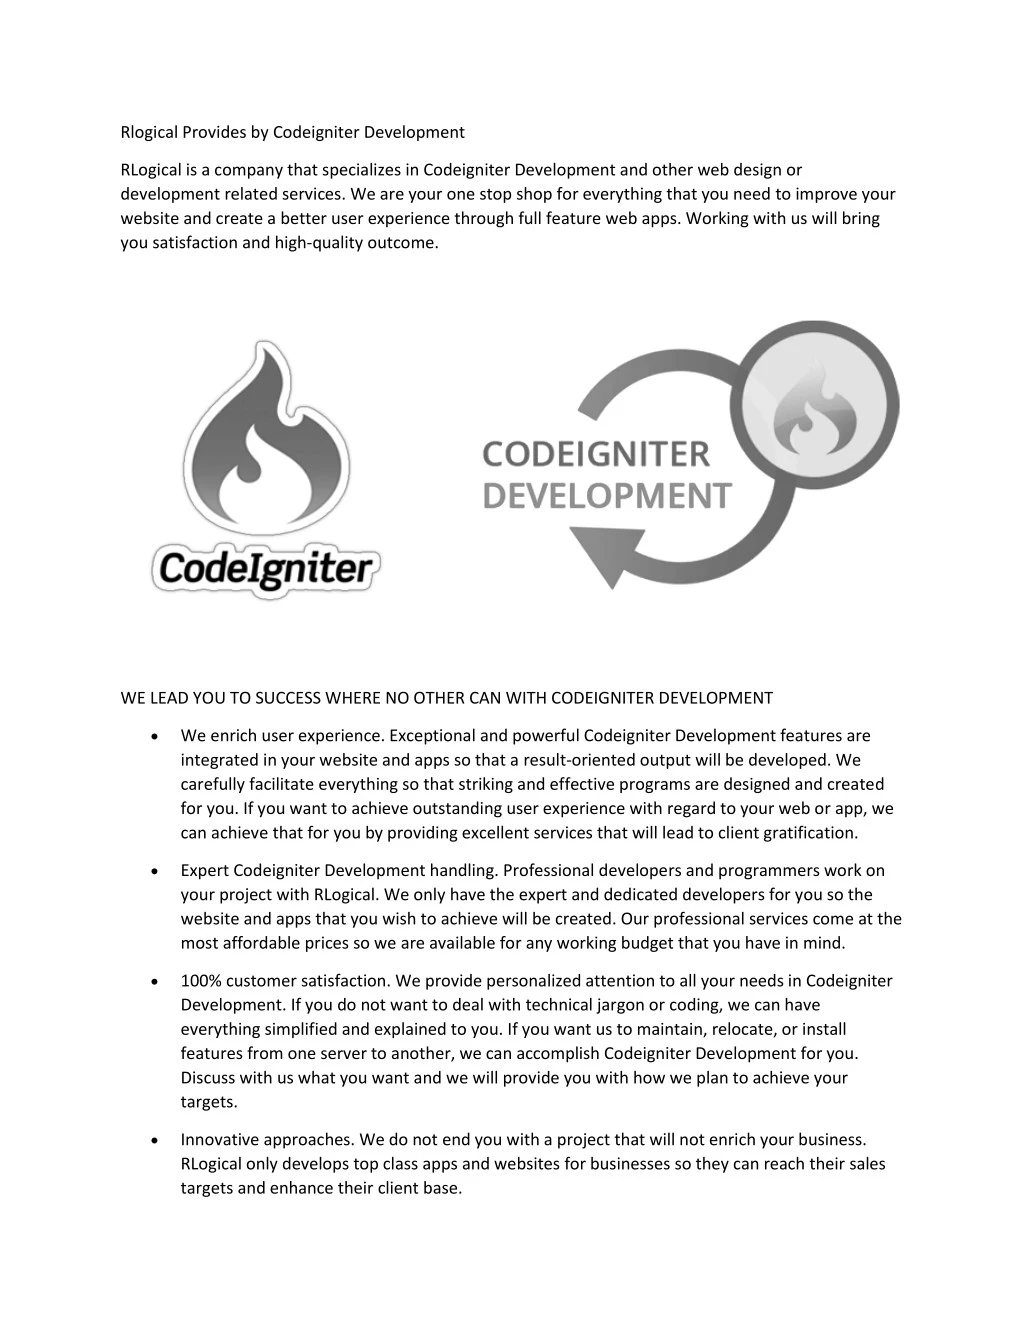 rlogical provides by codeigniter development